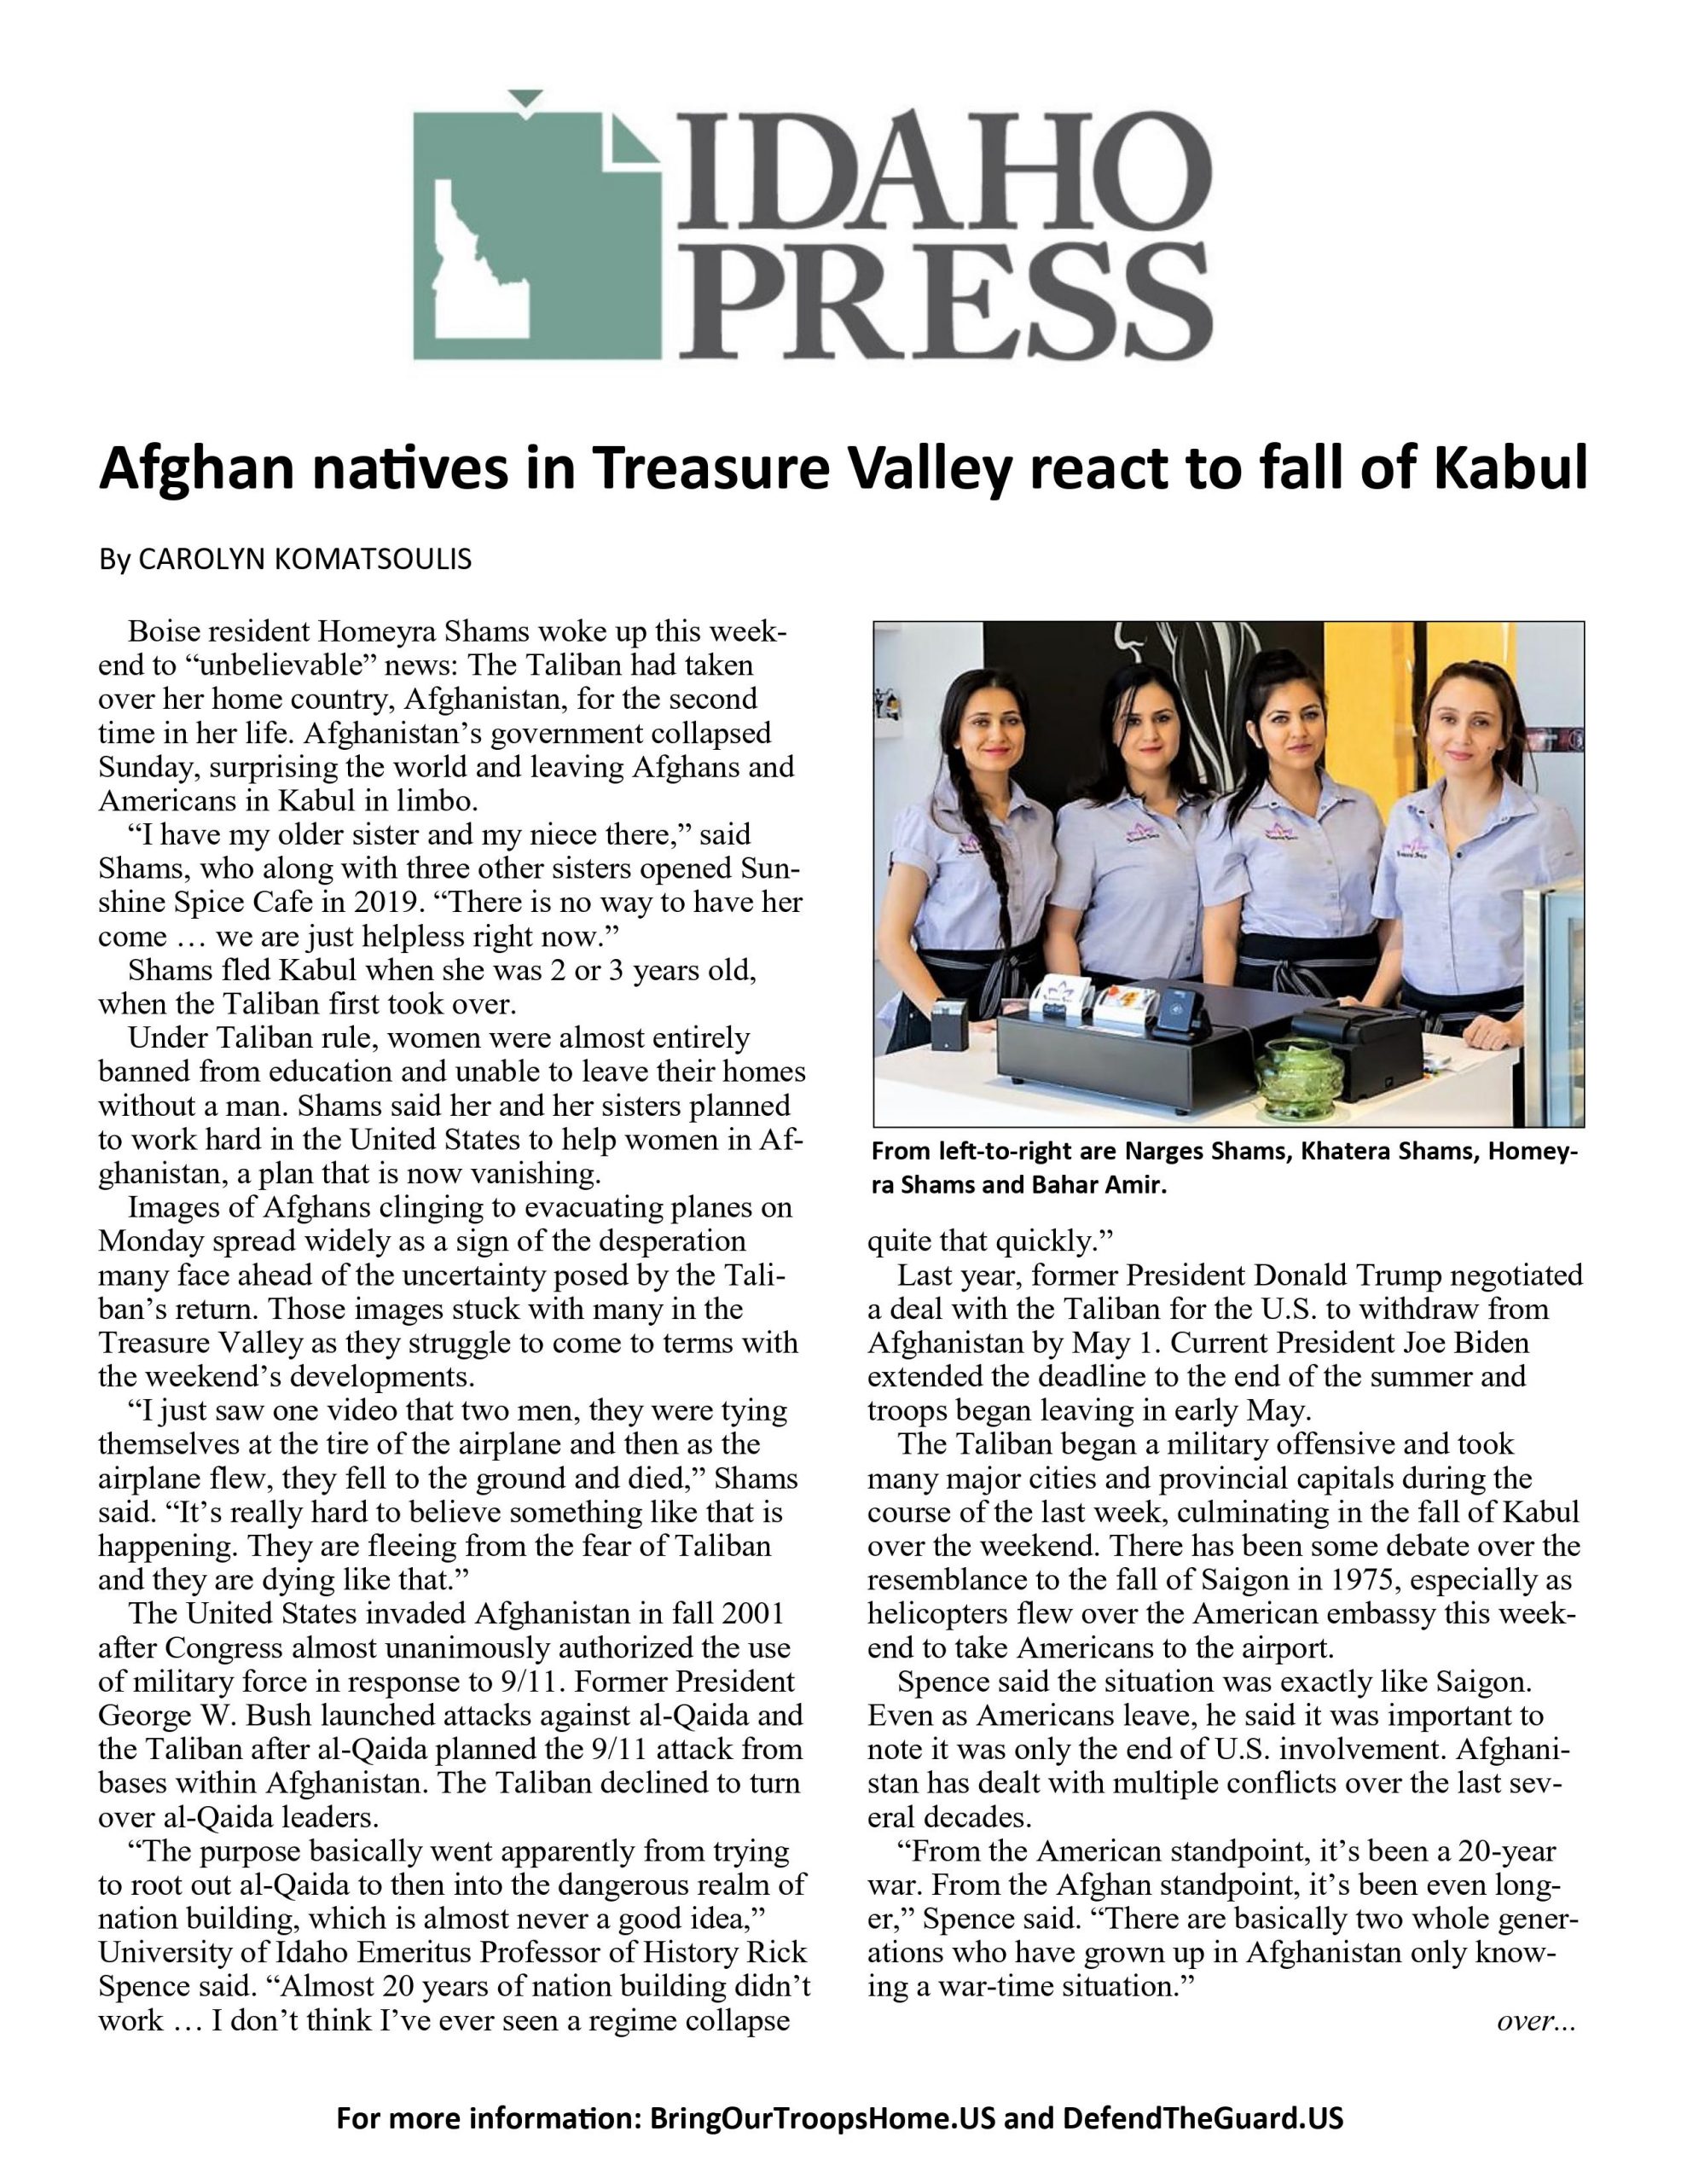 Afghan Natives in Treasure Valley React to Fall of Kabul